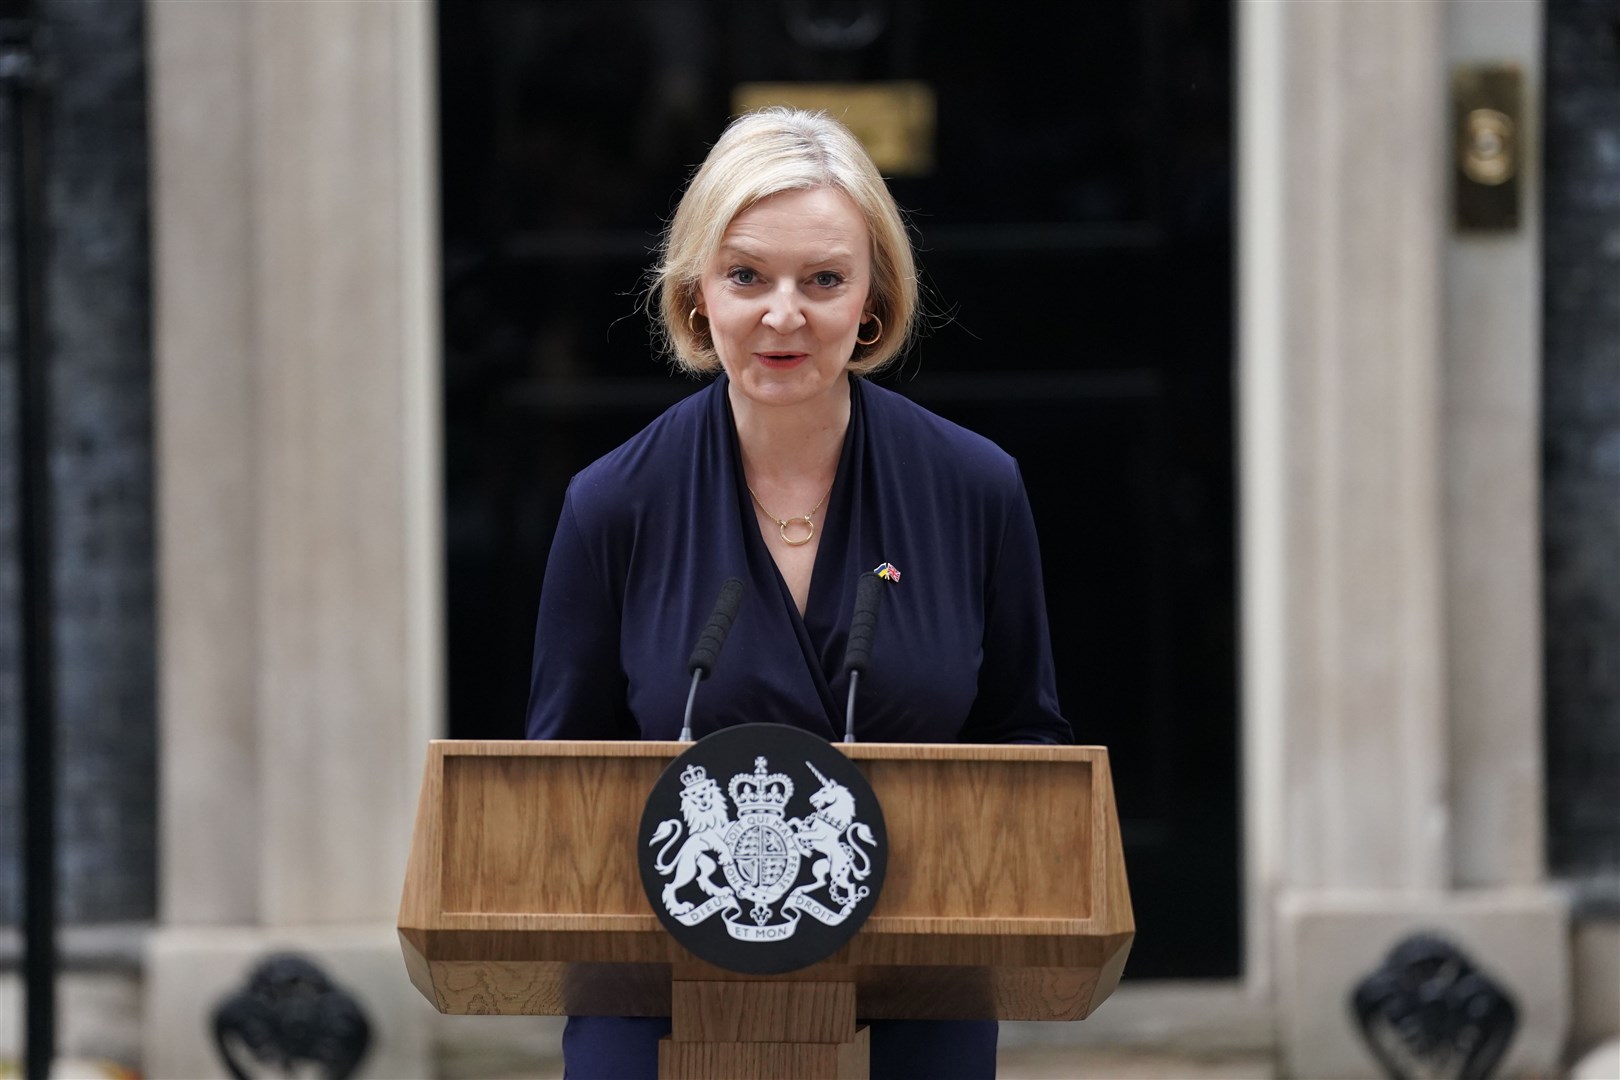 Liz Truss announces her resignation on the steps of Downing Street (Kirsty O’Connor/PA)